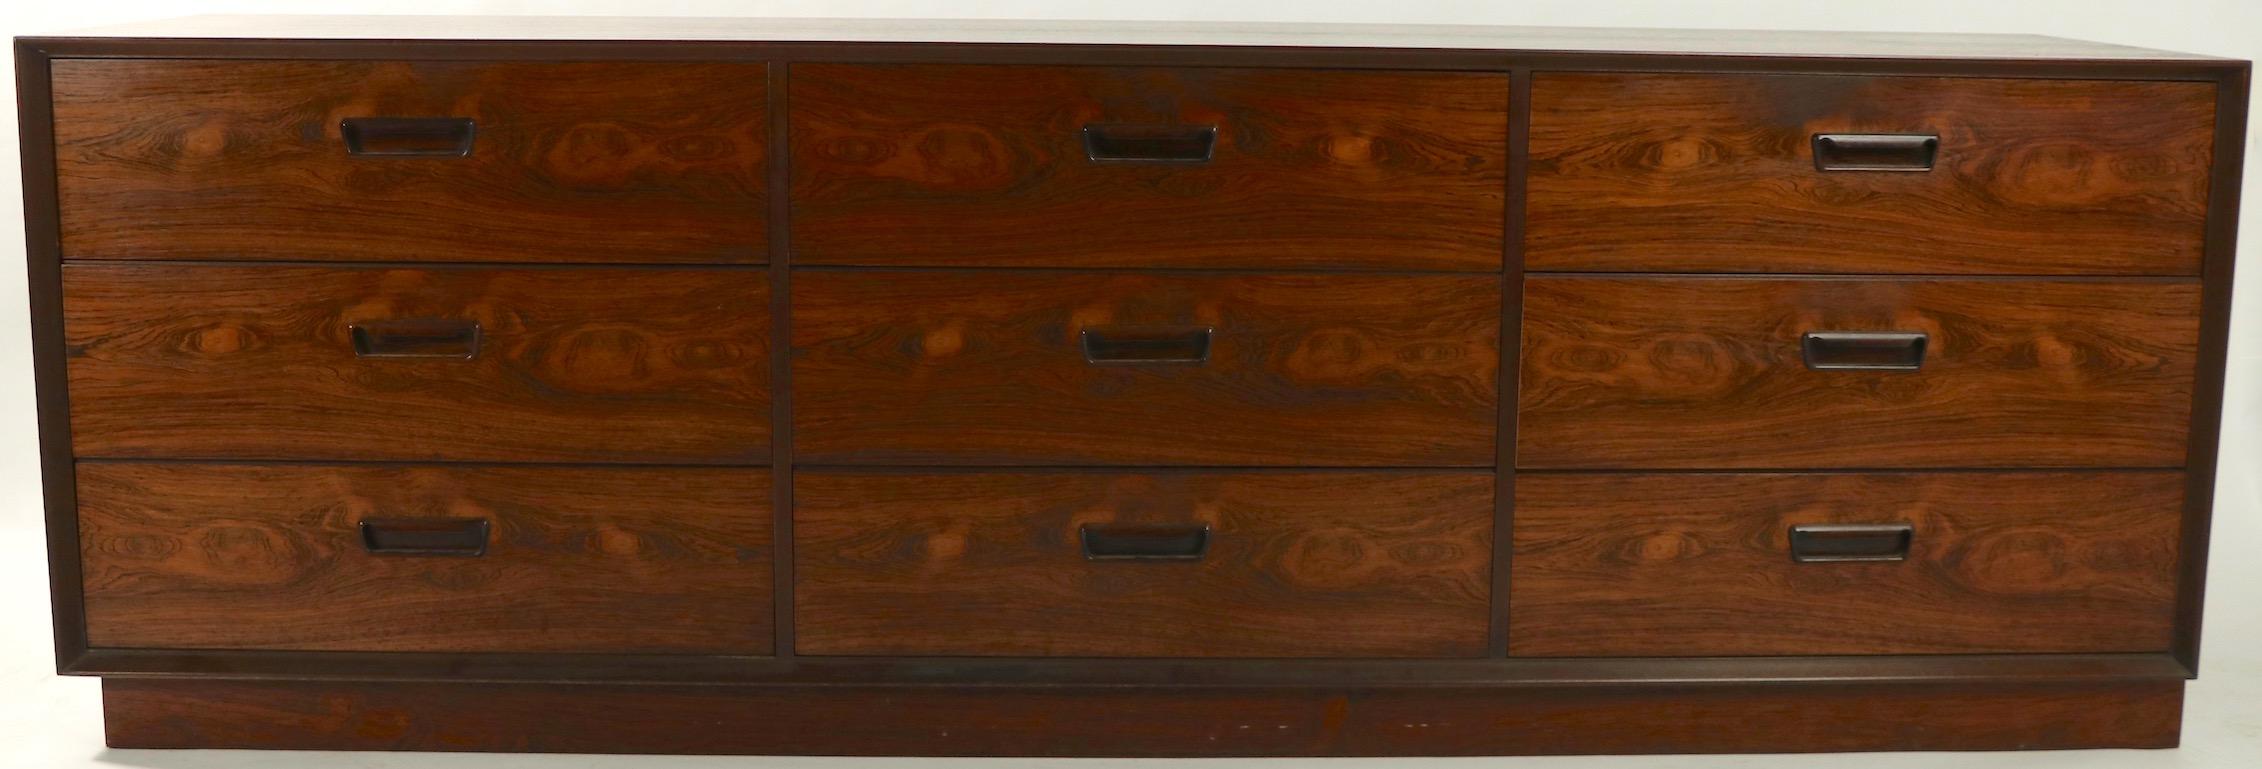 Stunning pair of large dressers made in Denmark for Dyrlund. Both are executed in rich and vibrant rosewood veneer, each having three banks of three drawers, with cutout inset pull handles. Very unusual to find a matched pair of dresser, credenza,